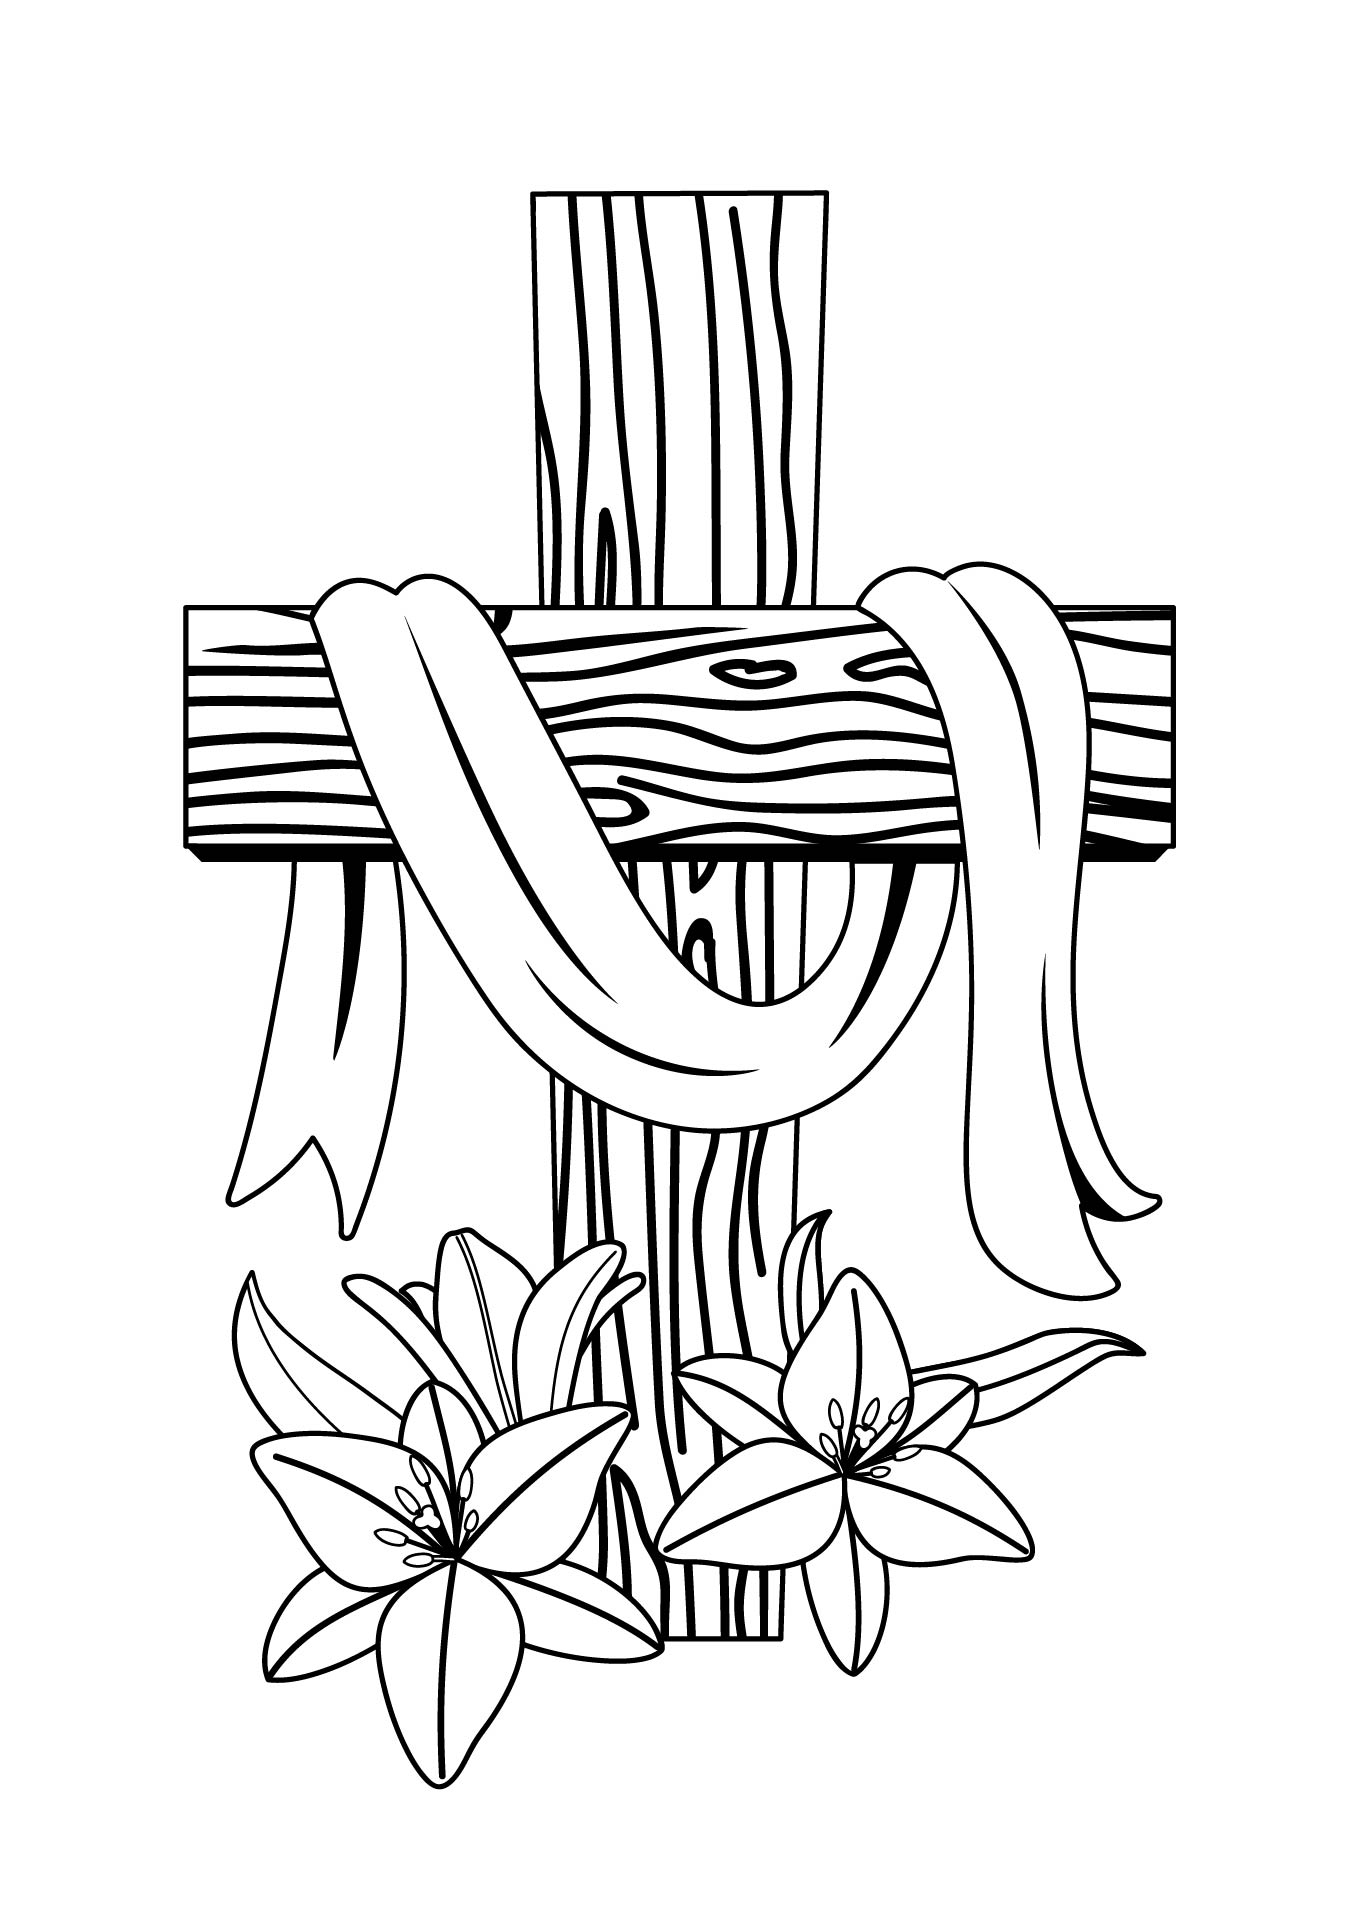 5-best-images-of-adult-coloring-pages-free-printables-easter-cross-cross-coloring-pages